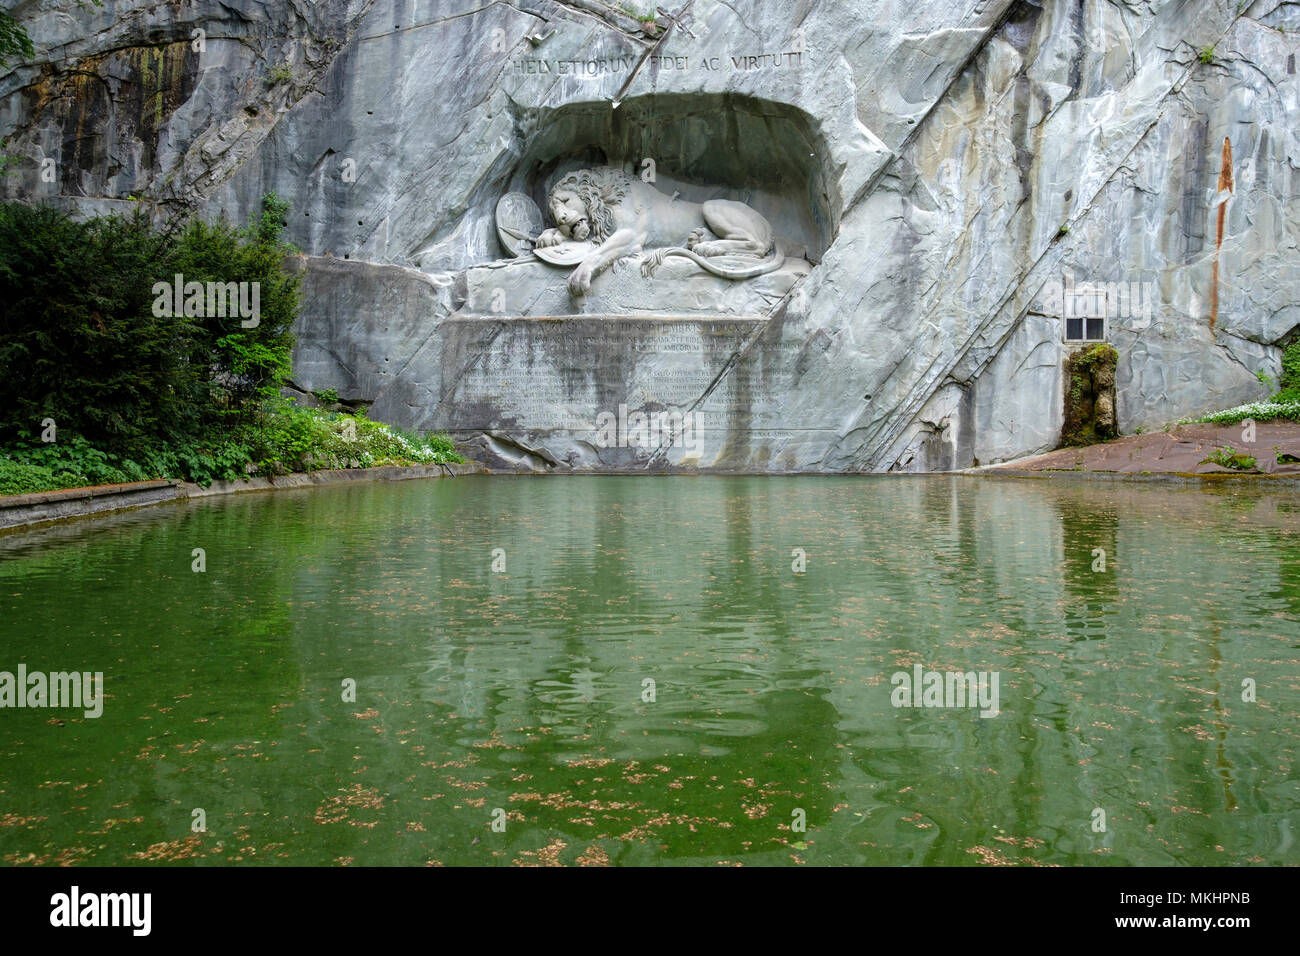 Close up of dying lion monument in Lucerne, Switzerland, Europe Stock Photo